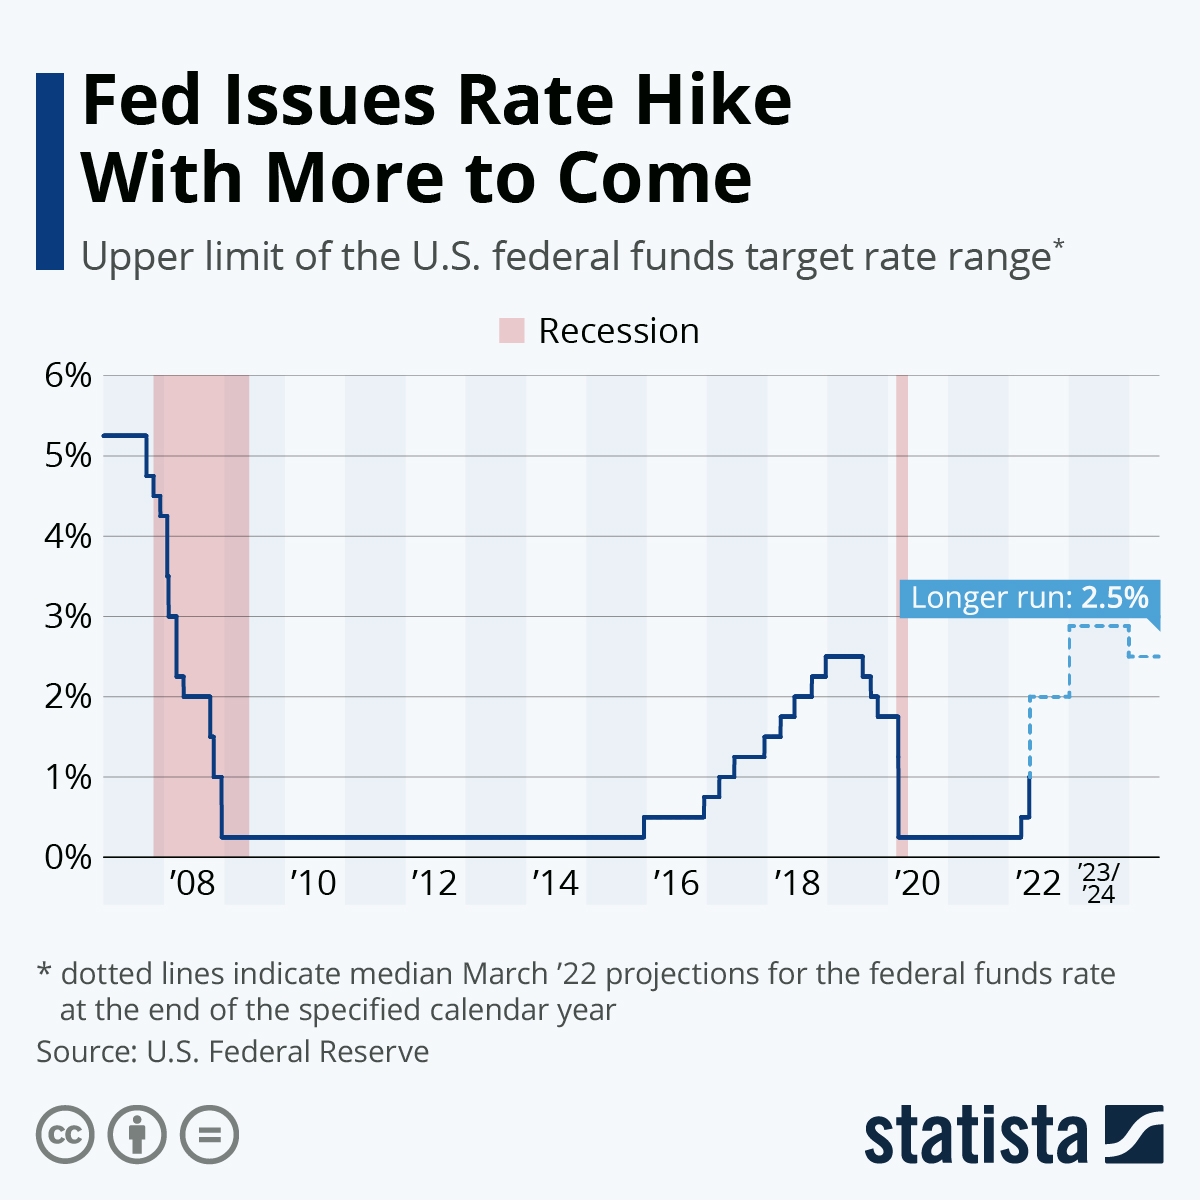 Fed Issues Rate Hike With More to Come